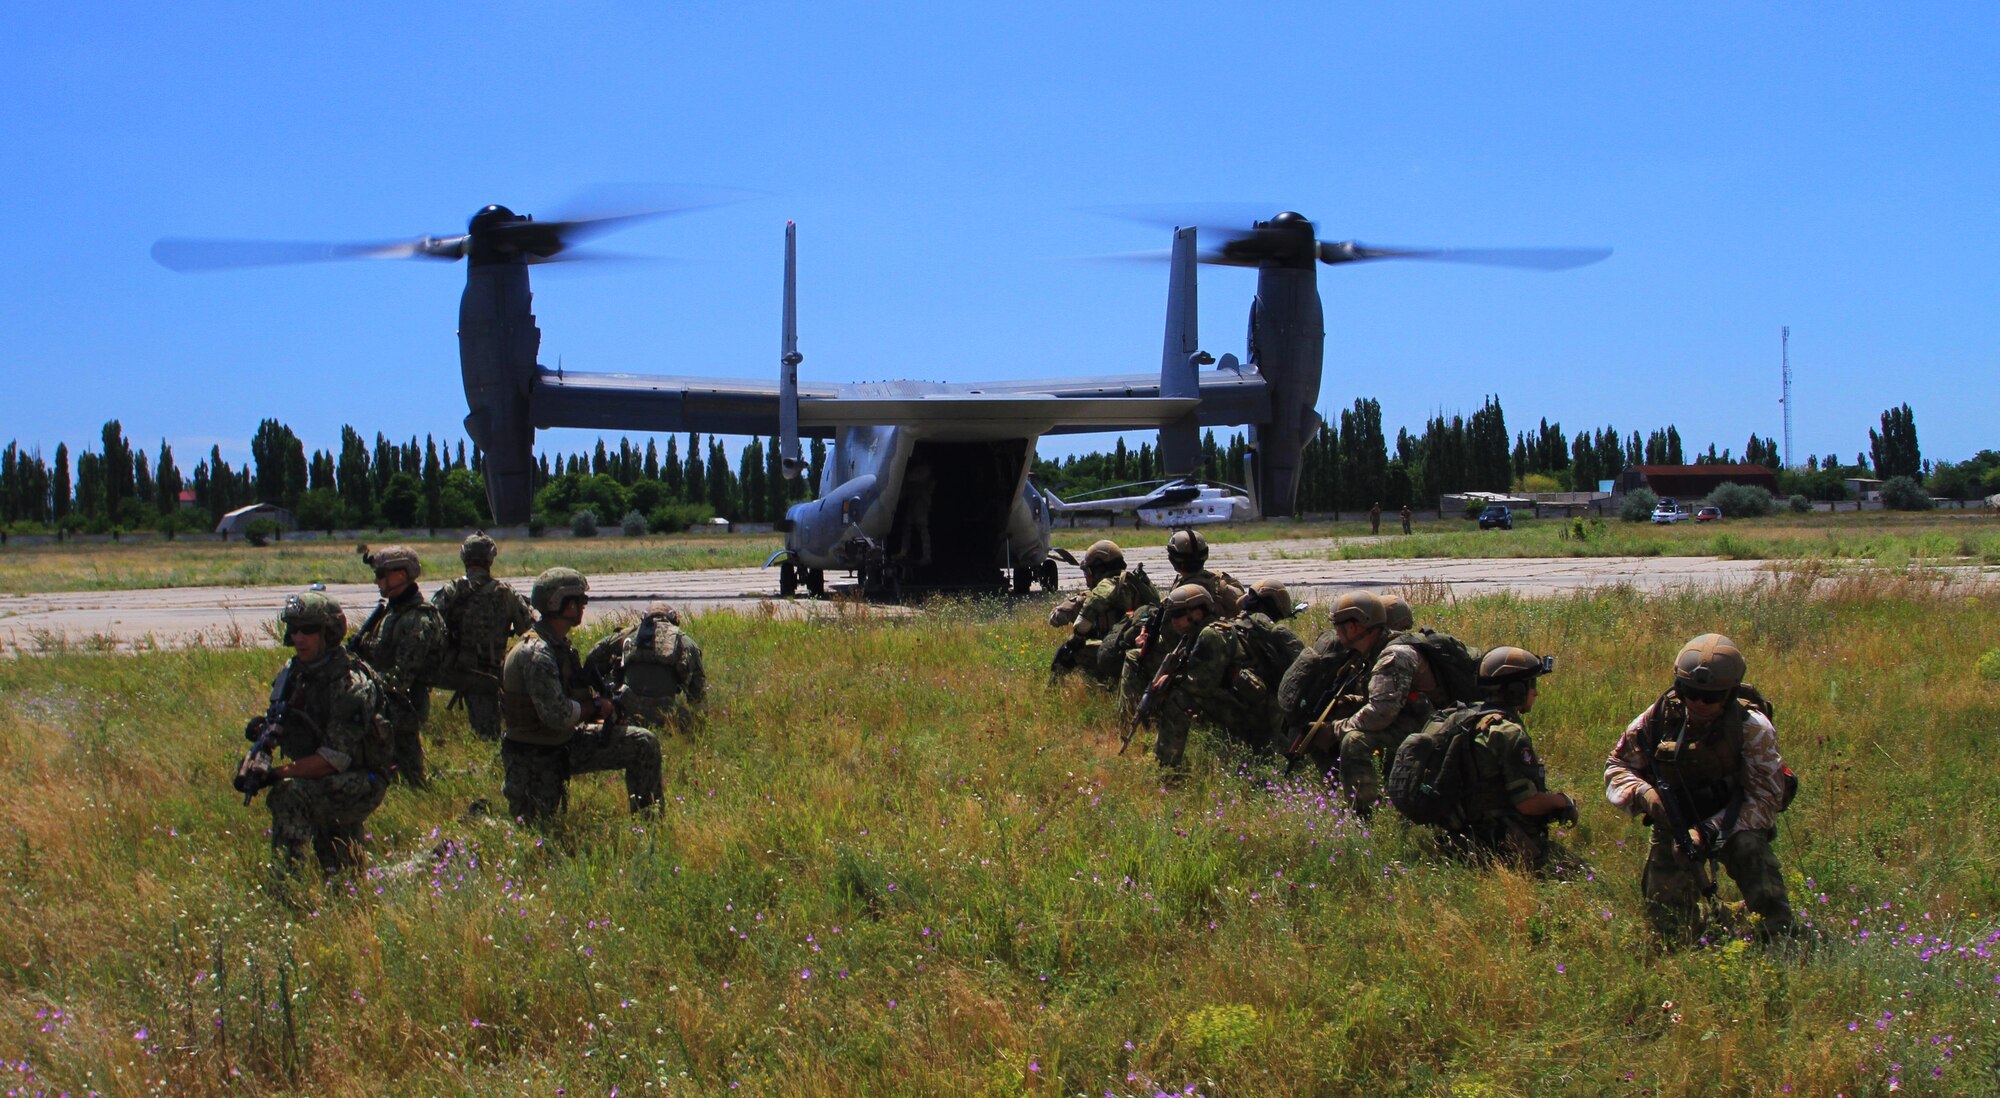 A combined U.S. and Ukrainian team of Special Operation Forces wait to board a CV-22 Osprey during air movement training in Ukraine, July 14, 2017.  Sea Breeze is a U.S. and Ukraine co-hosted multinational maritime exercise held in the Black Sea and is designed to enhance interoperability of participating nations and strengthen maritime security within the region.